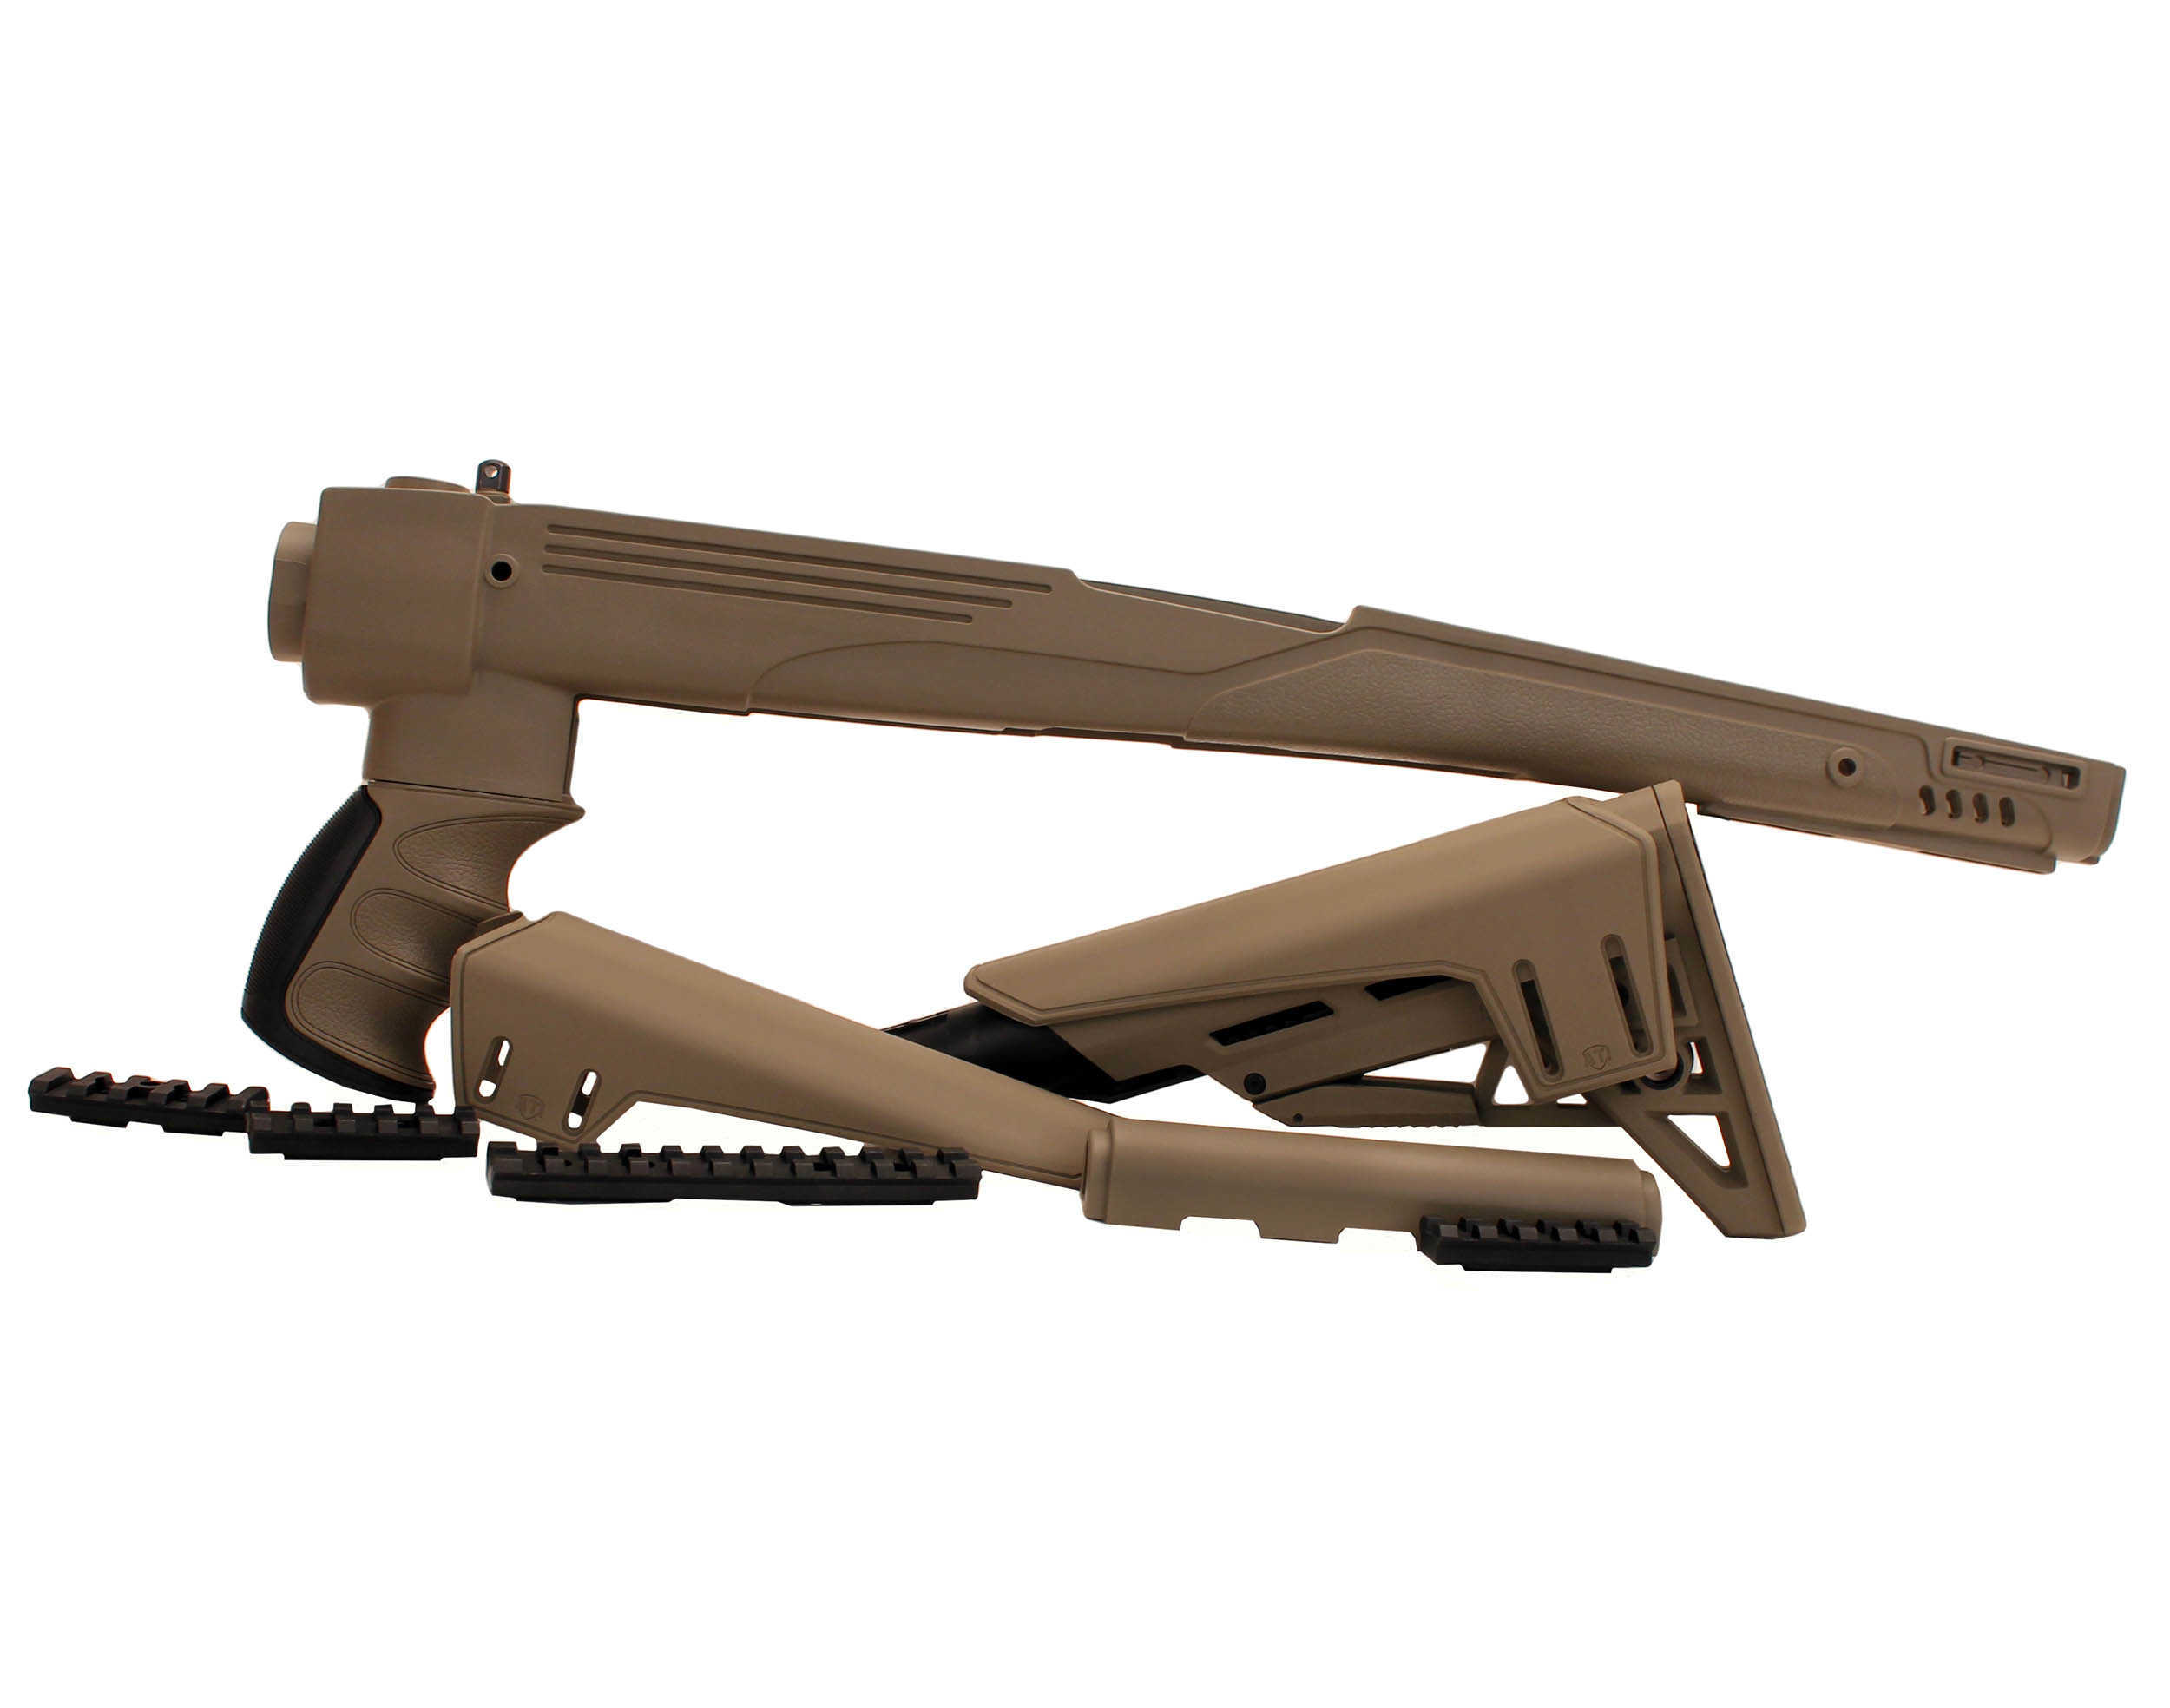 Advanced Technology Strikeforce TactLite Stock Fits SKS Adjustable Side Folding with Scorpion Recoil System Flat D